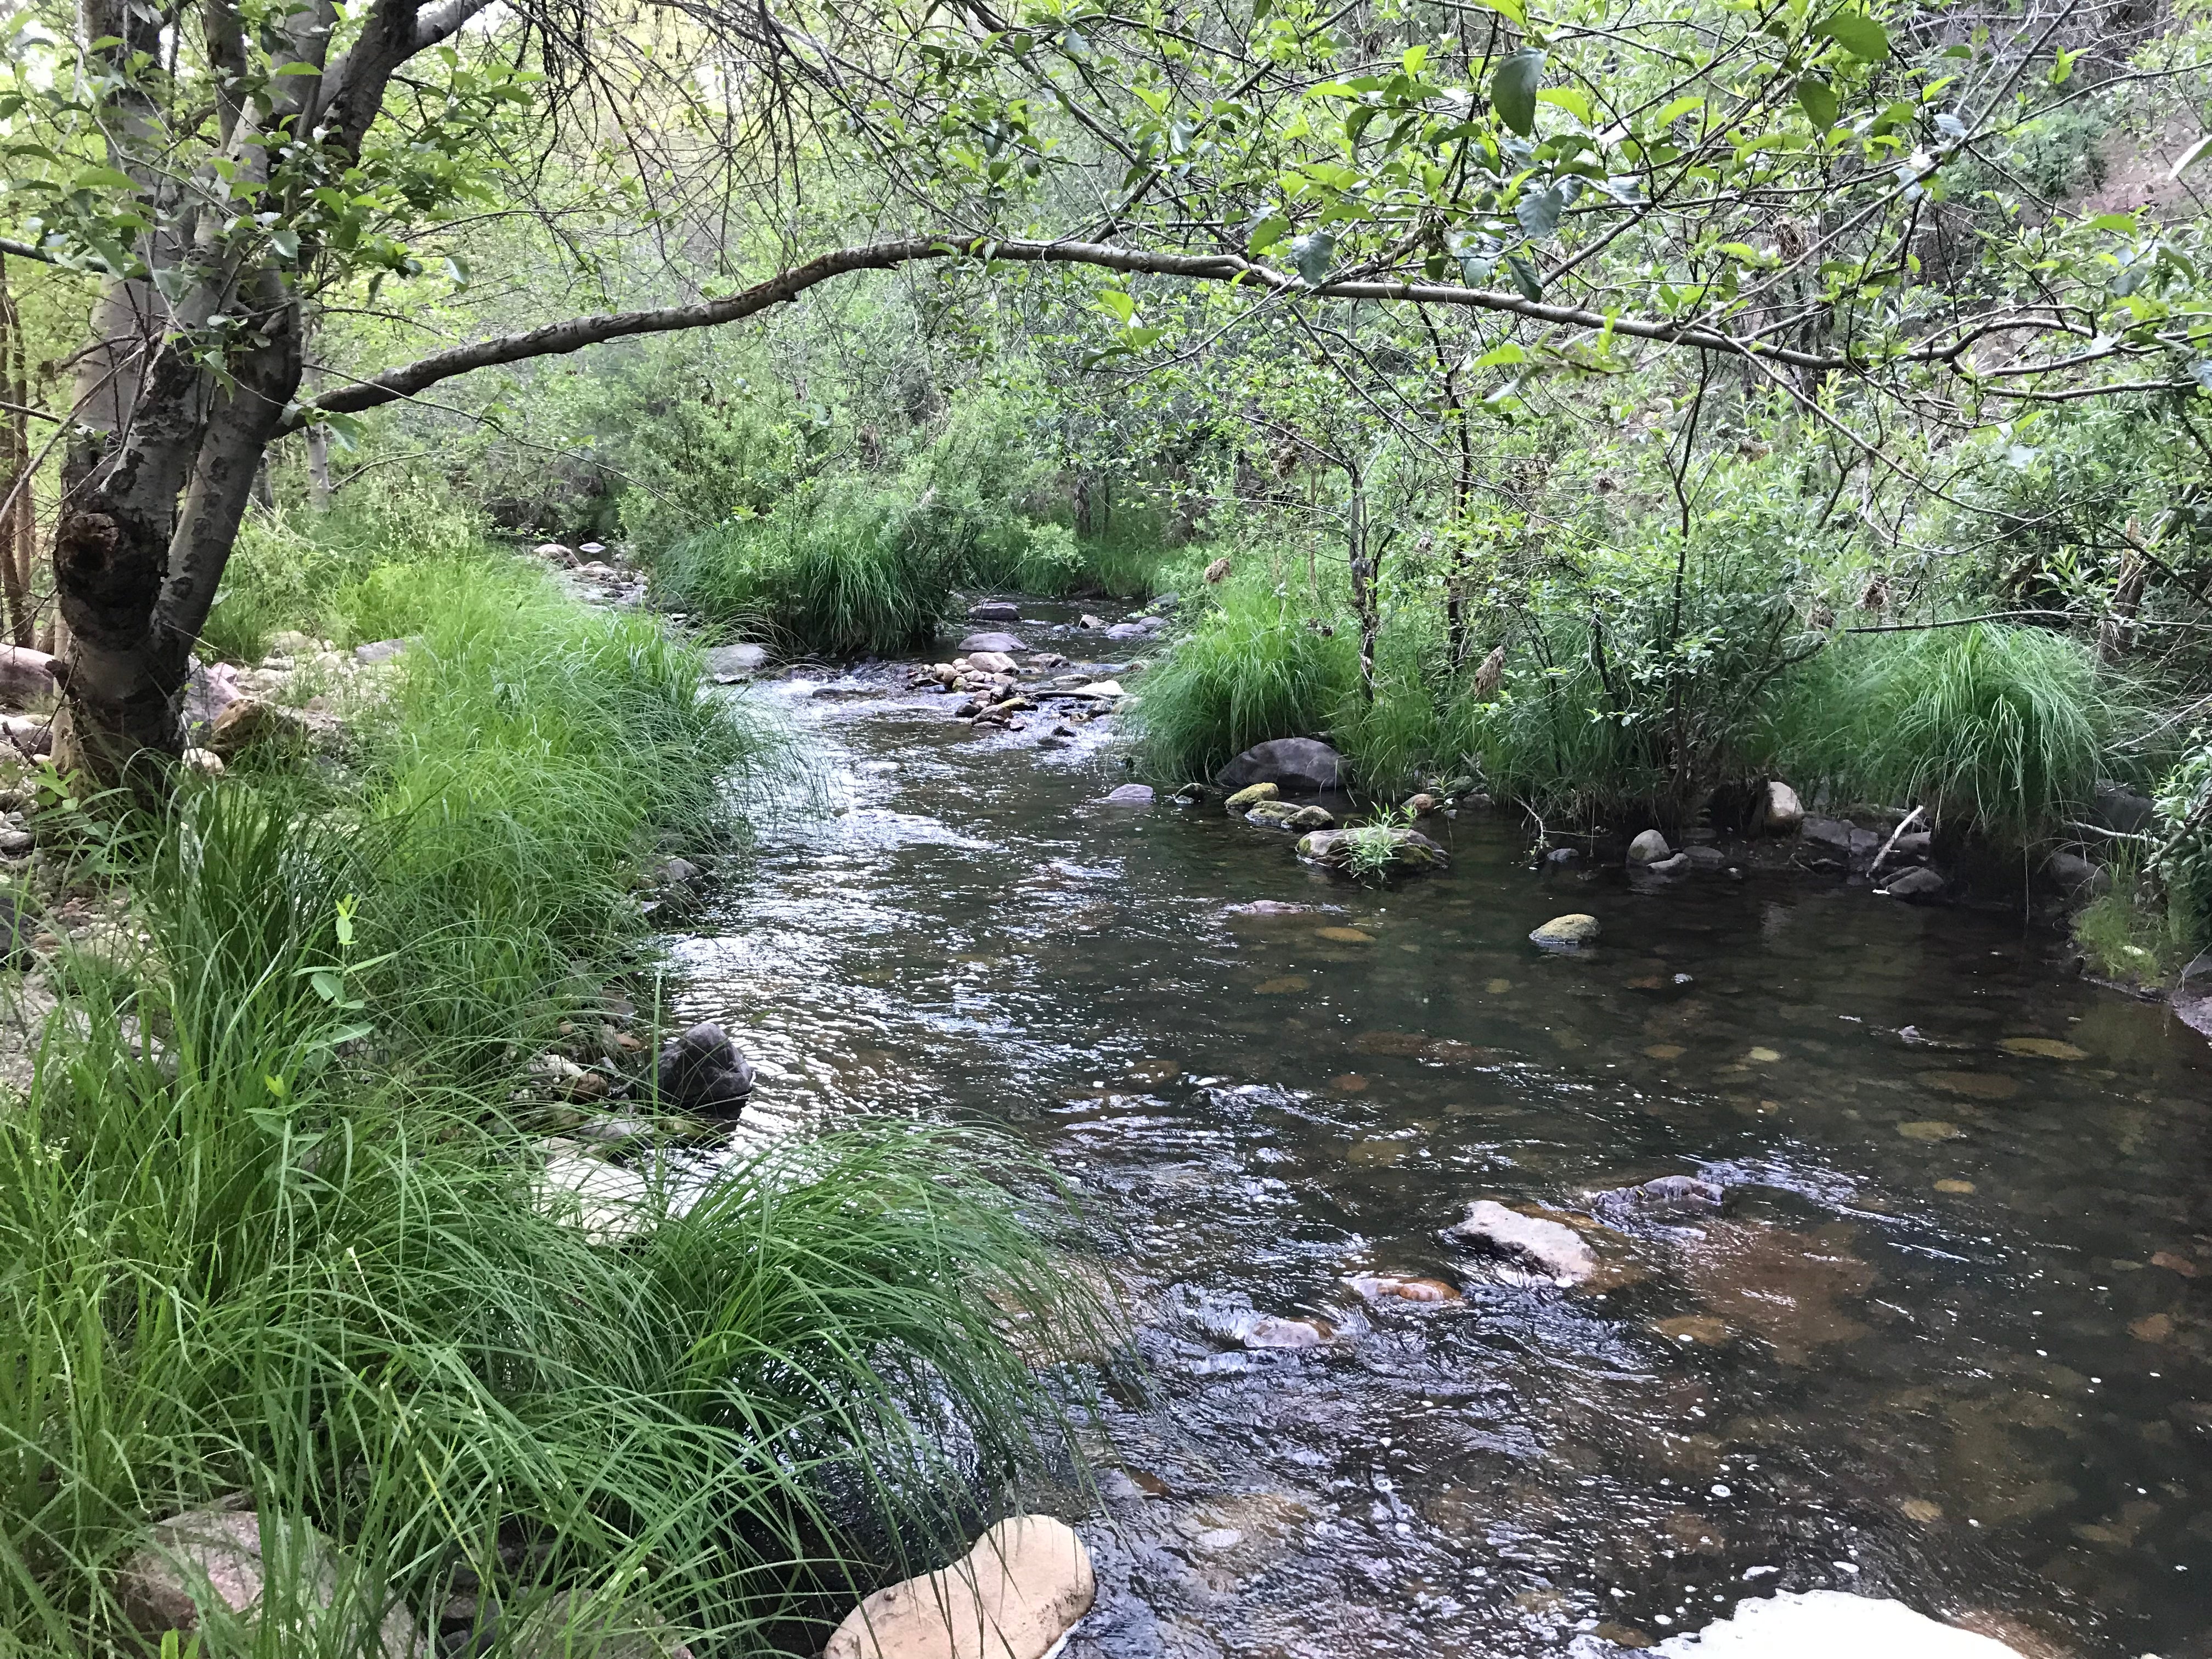 Tonto creek, two miles down the road